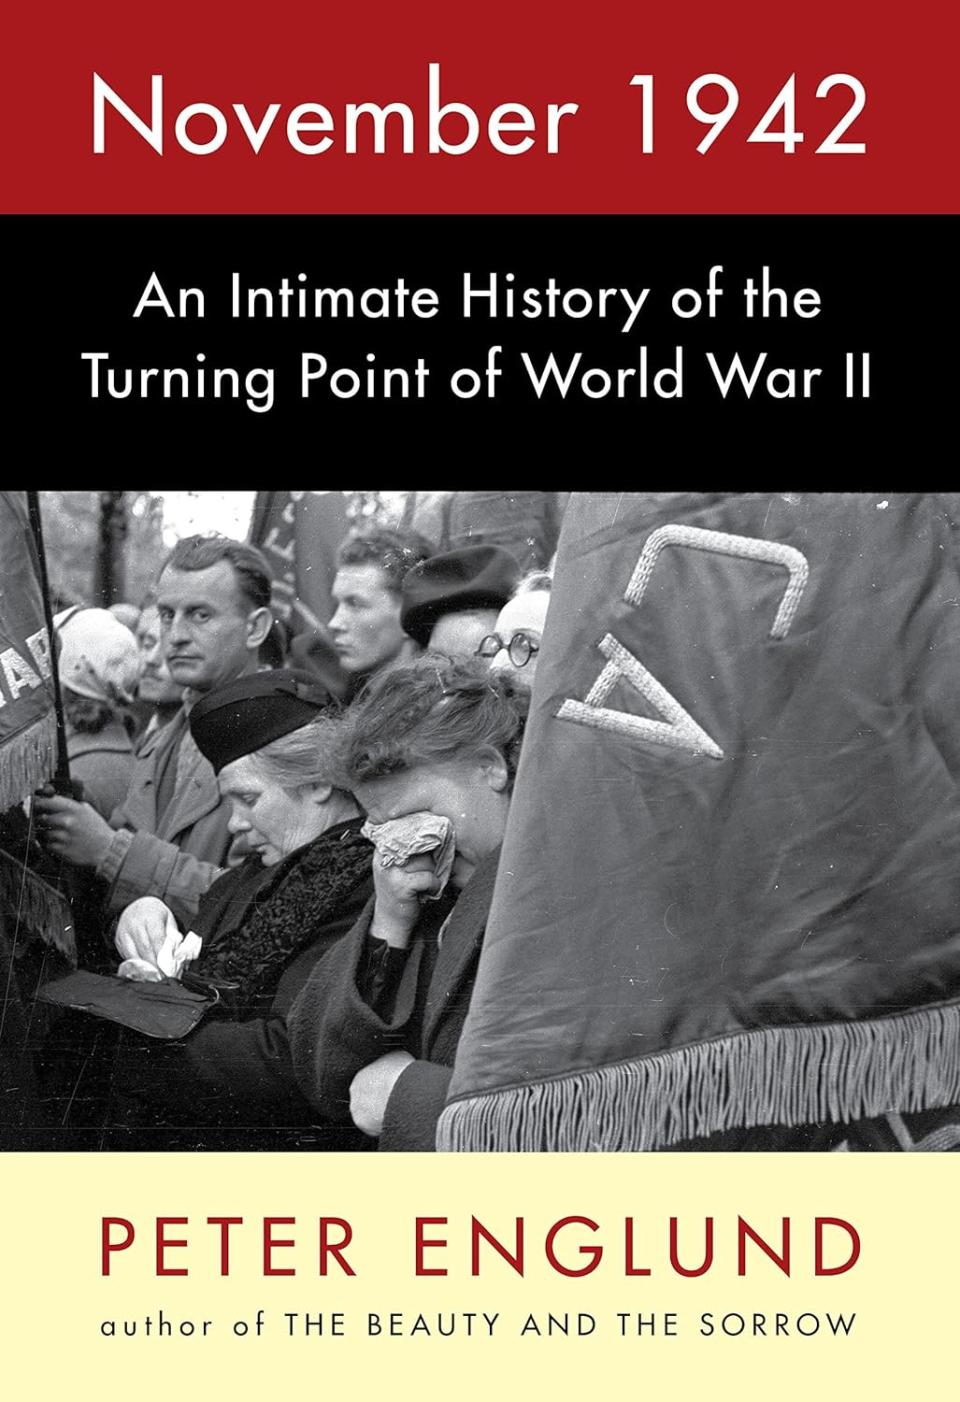 “November 1942: An Intimate History of the Turning Point of World War II”